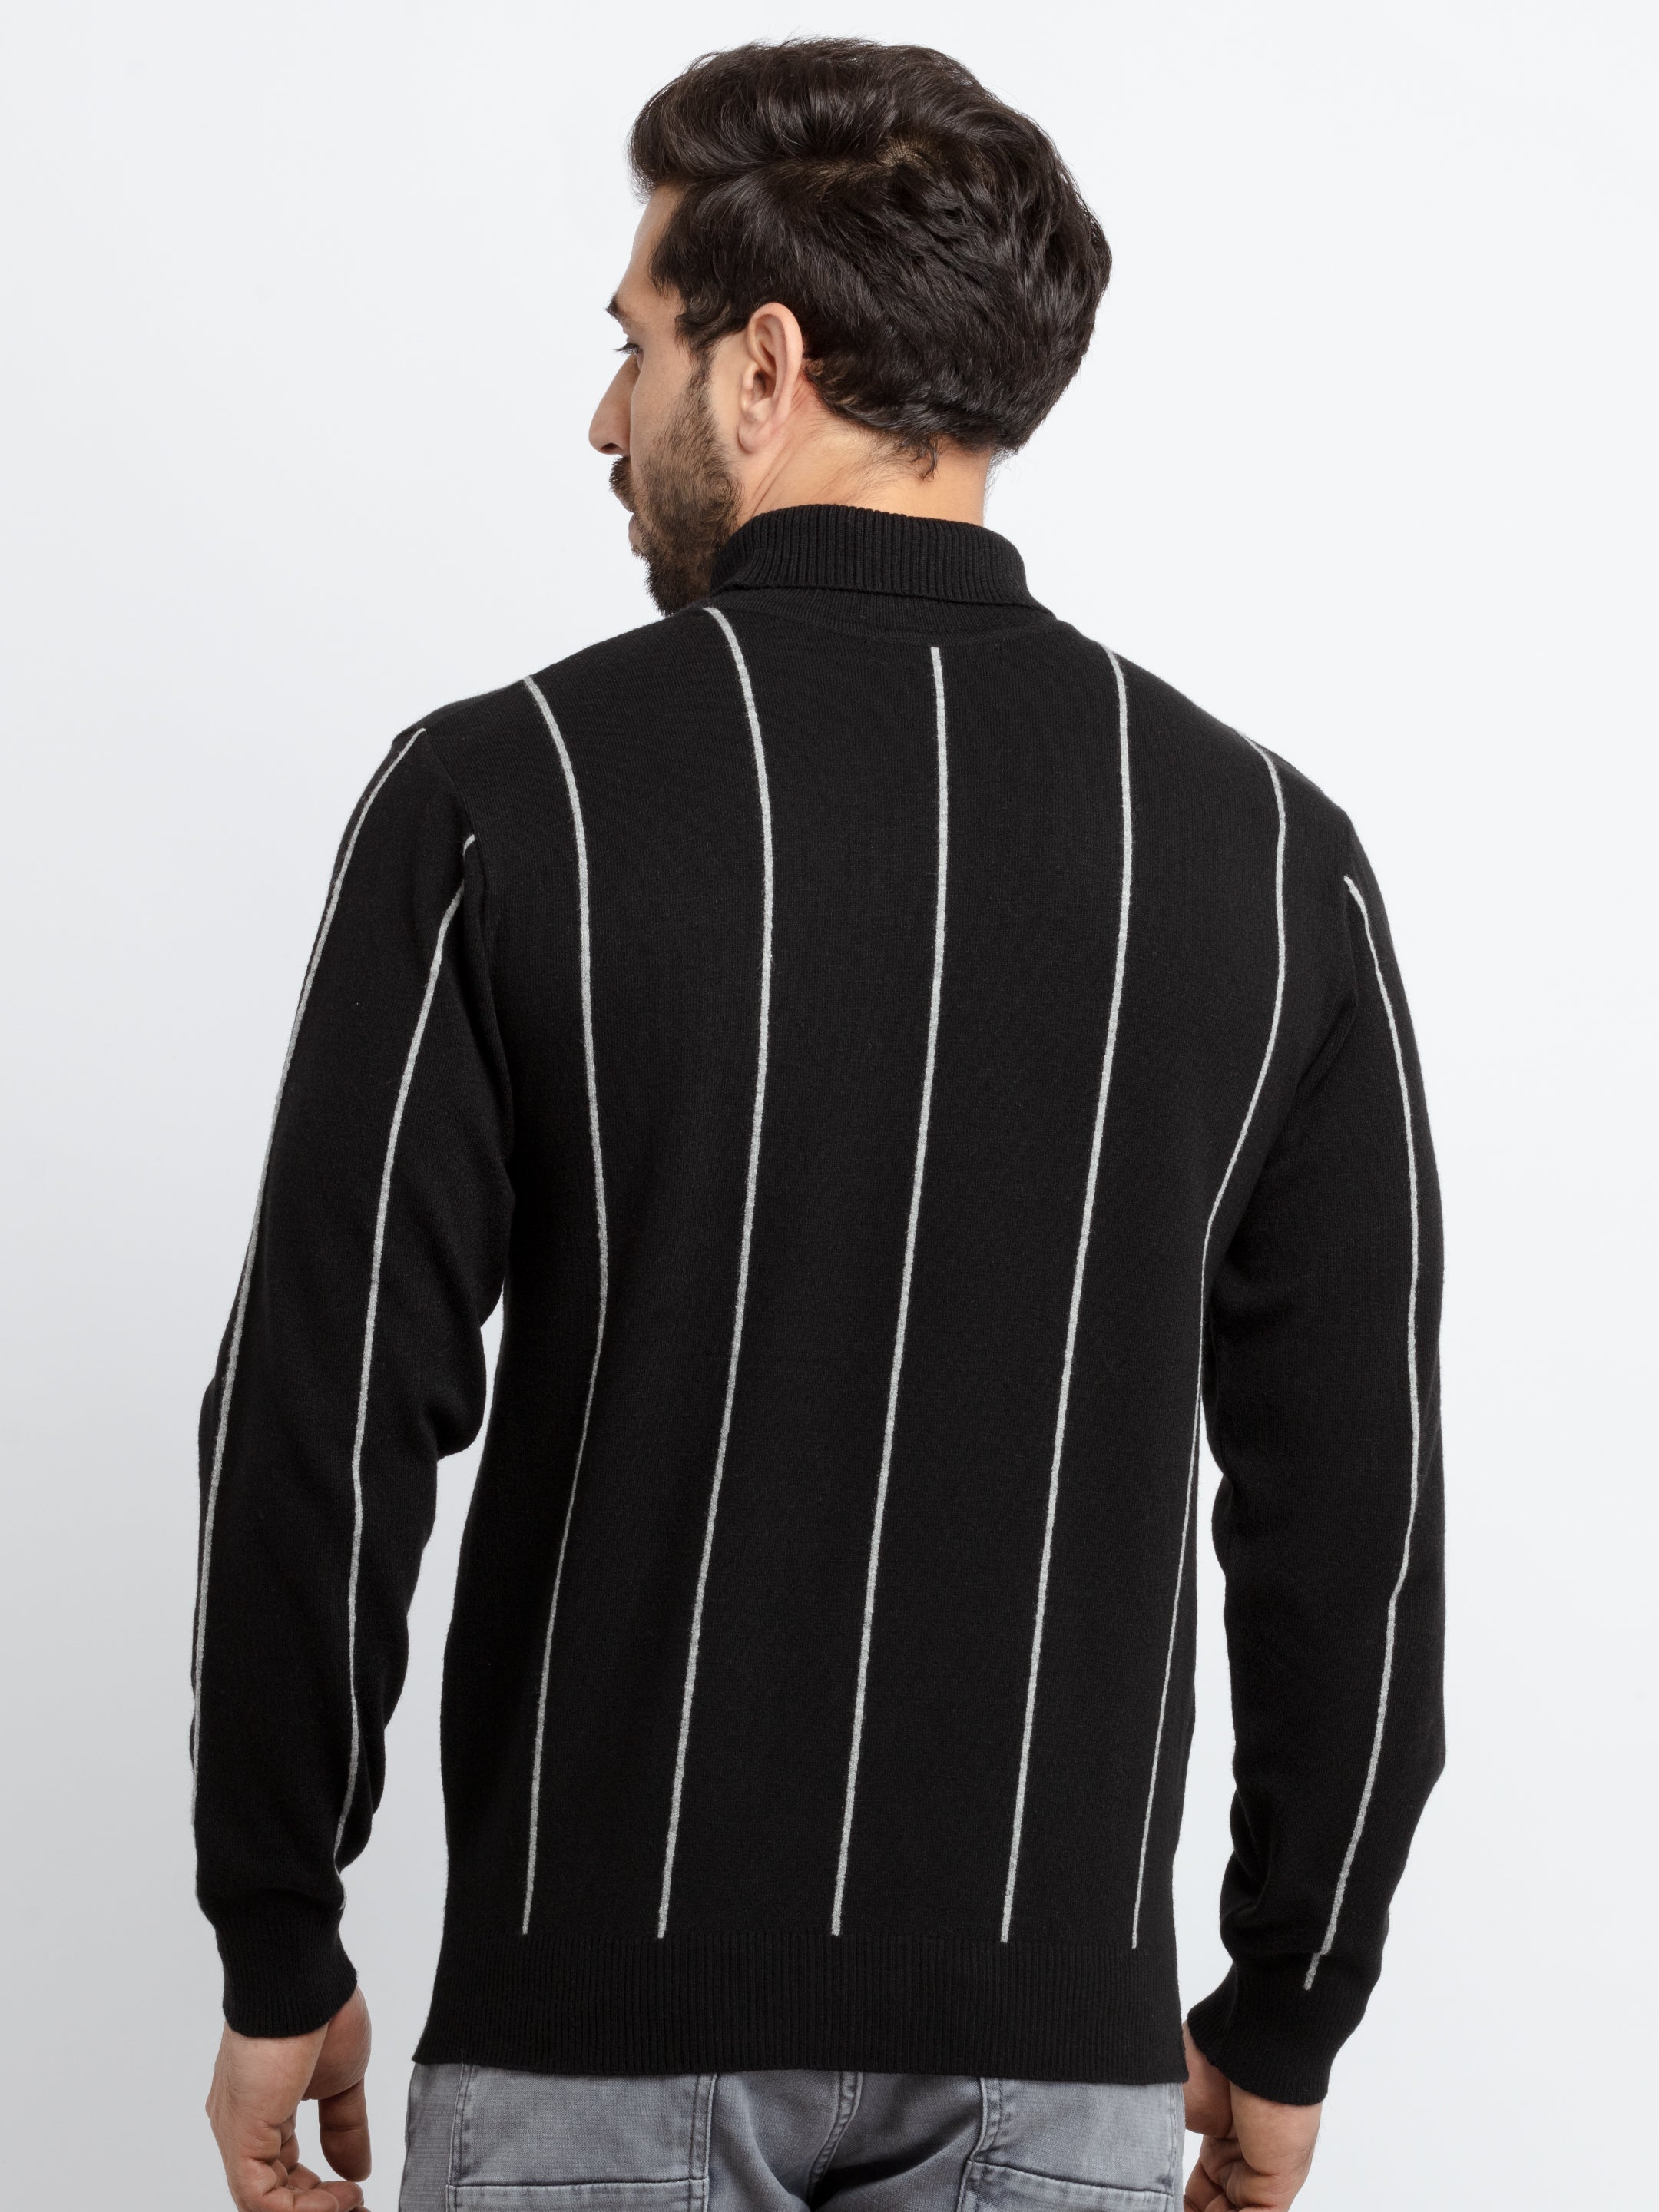 Mens Striped High Neck Sweater